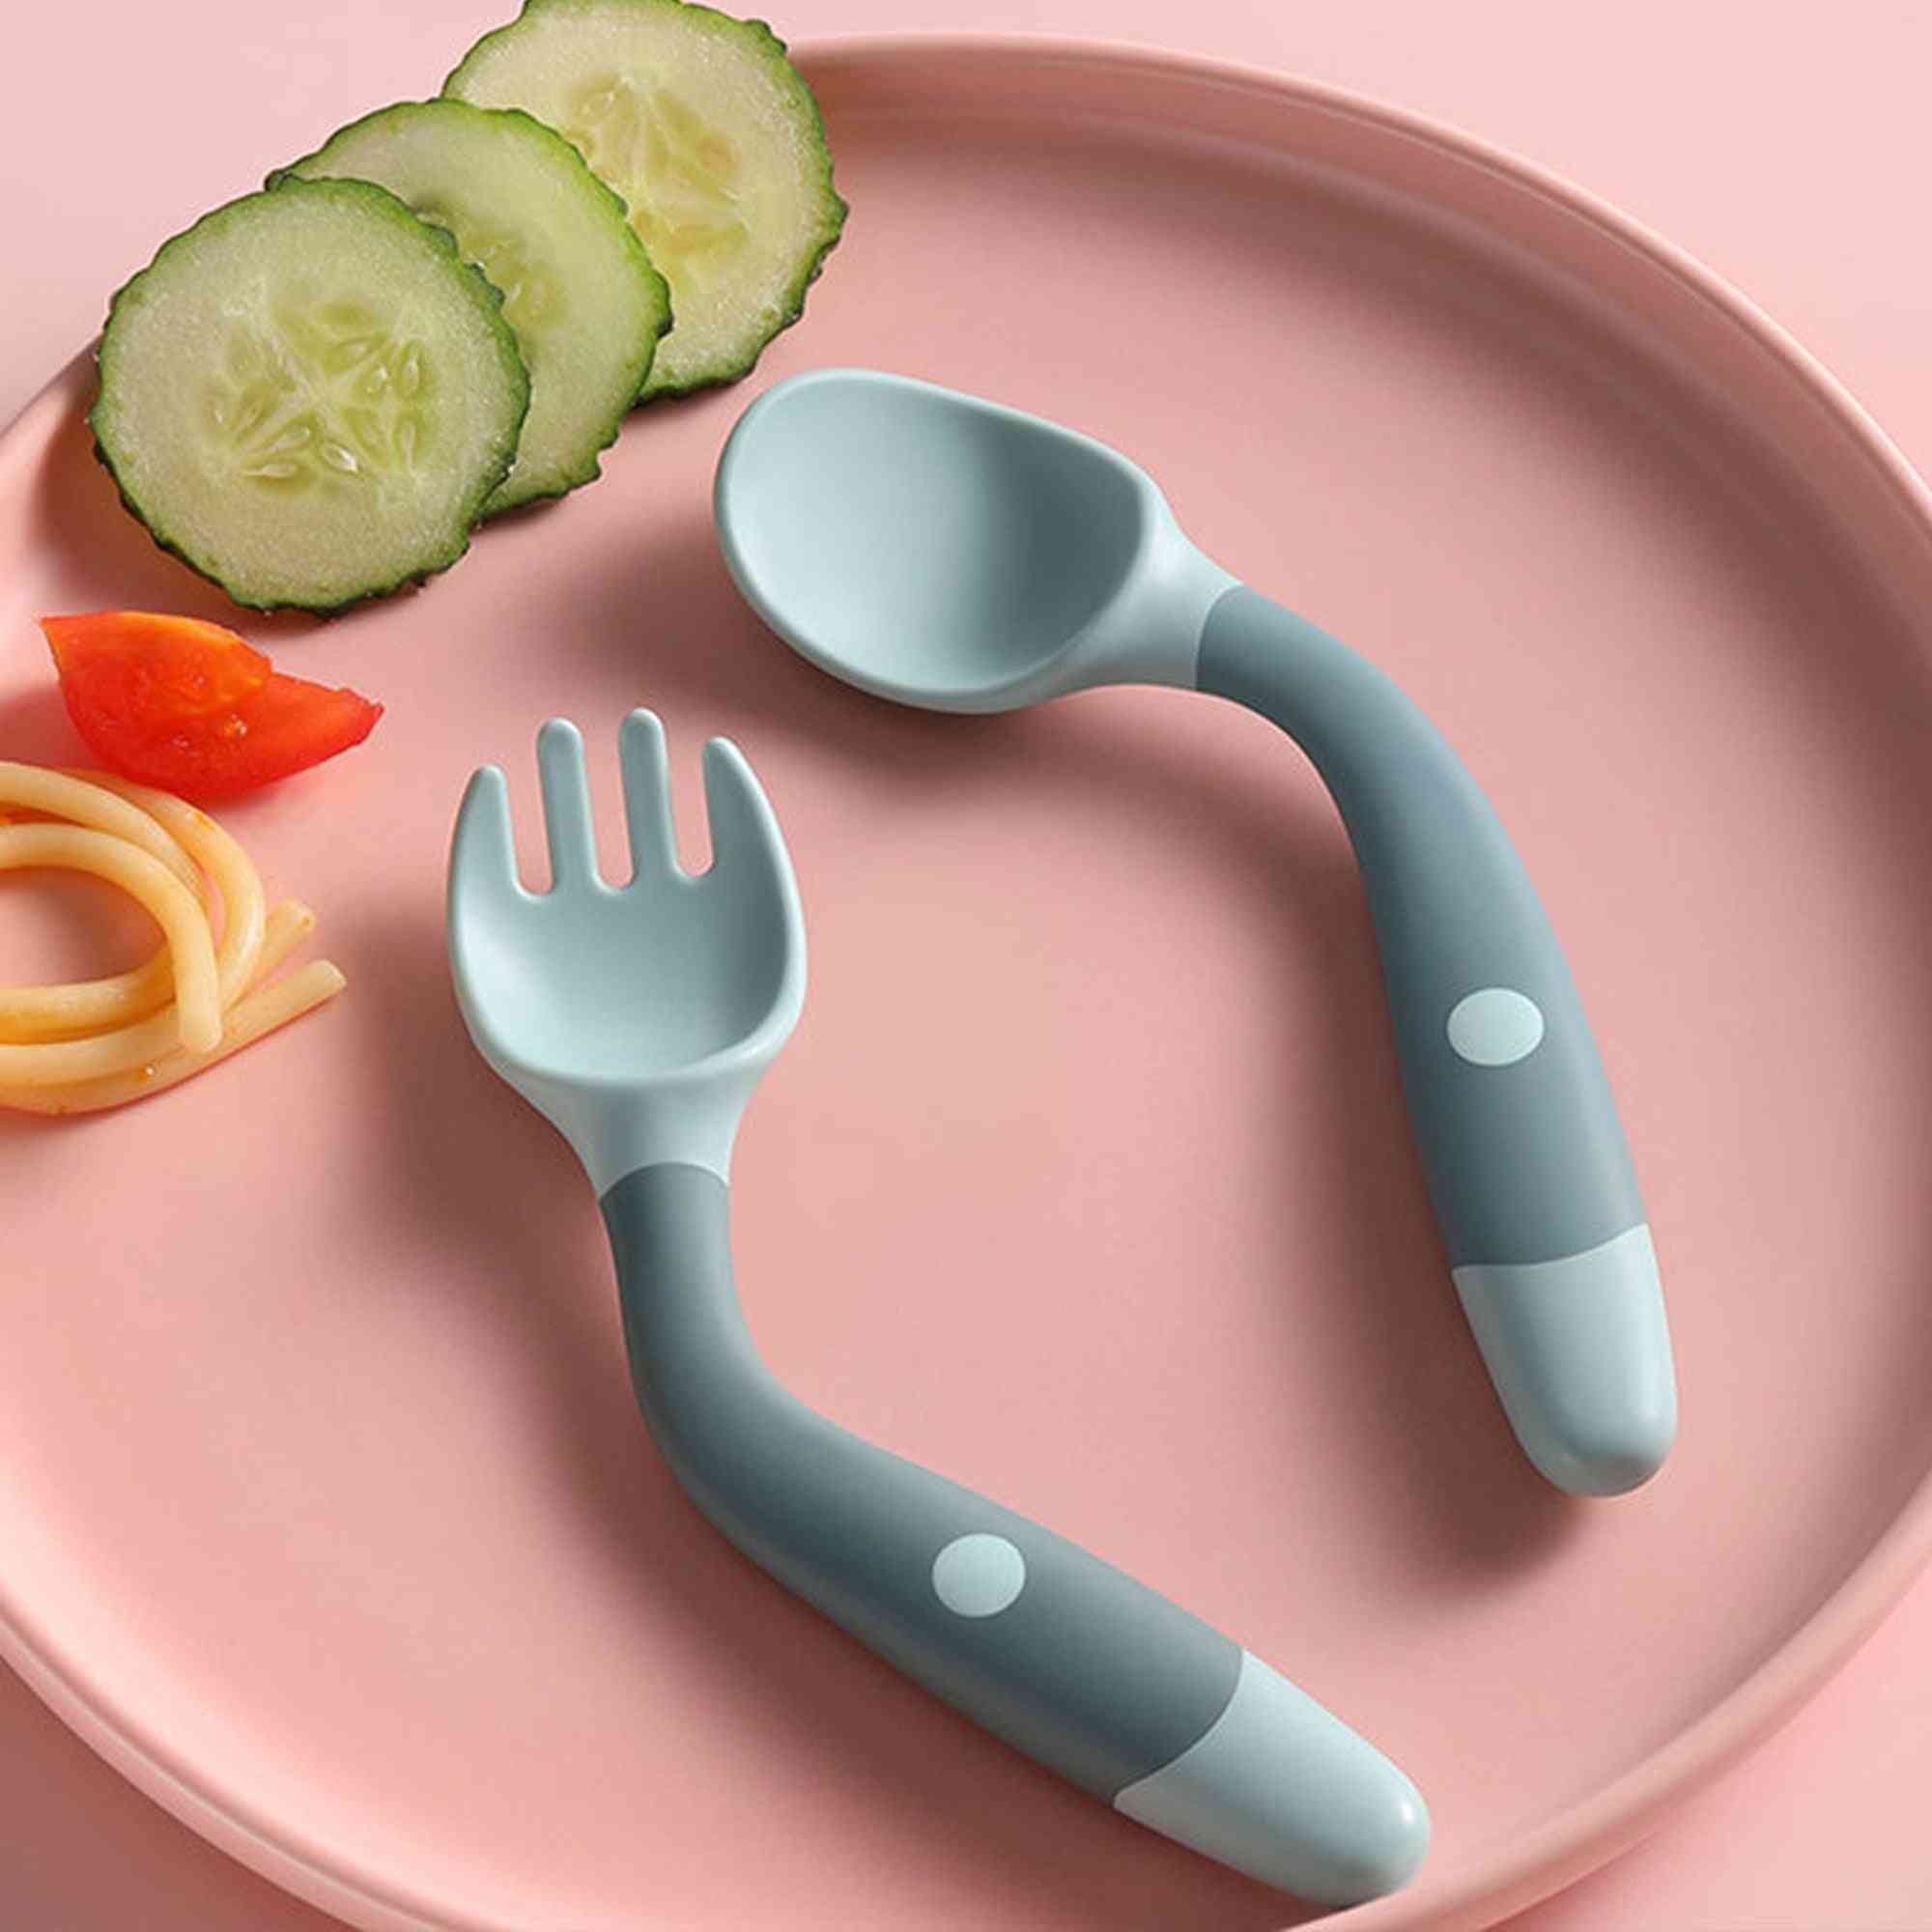 Auxiliary Food Eat, Bendable Soft Fork, Silicone Spoon Tableware Set For Baby